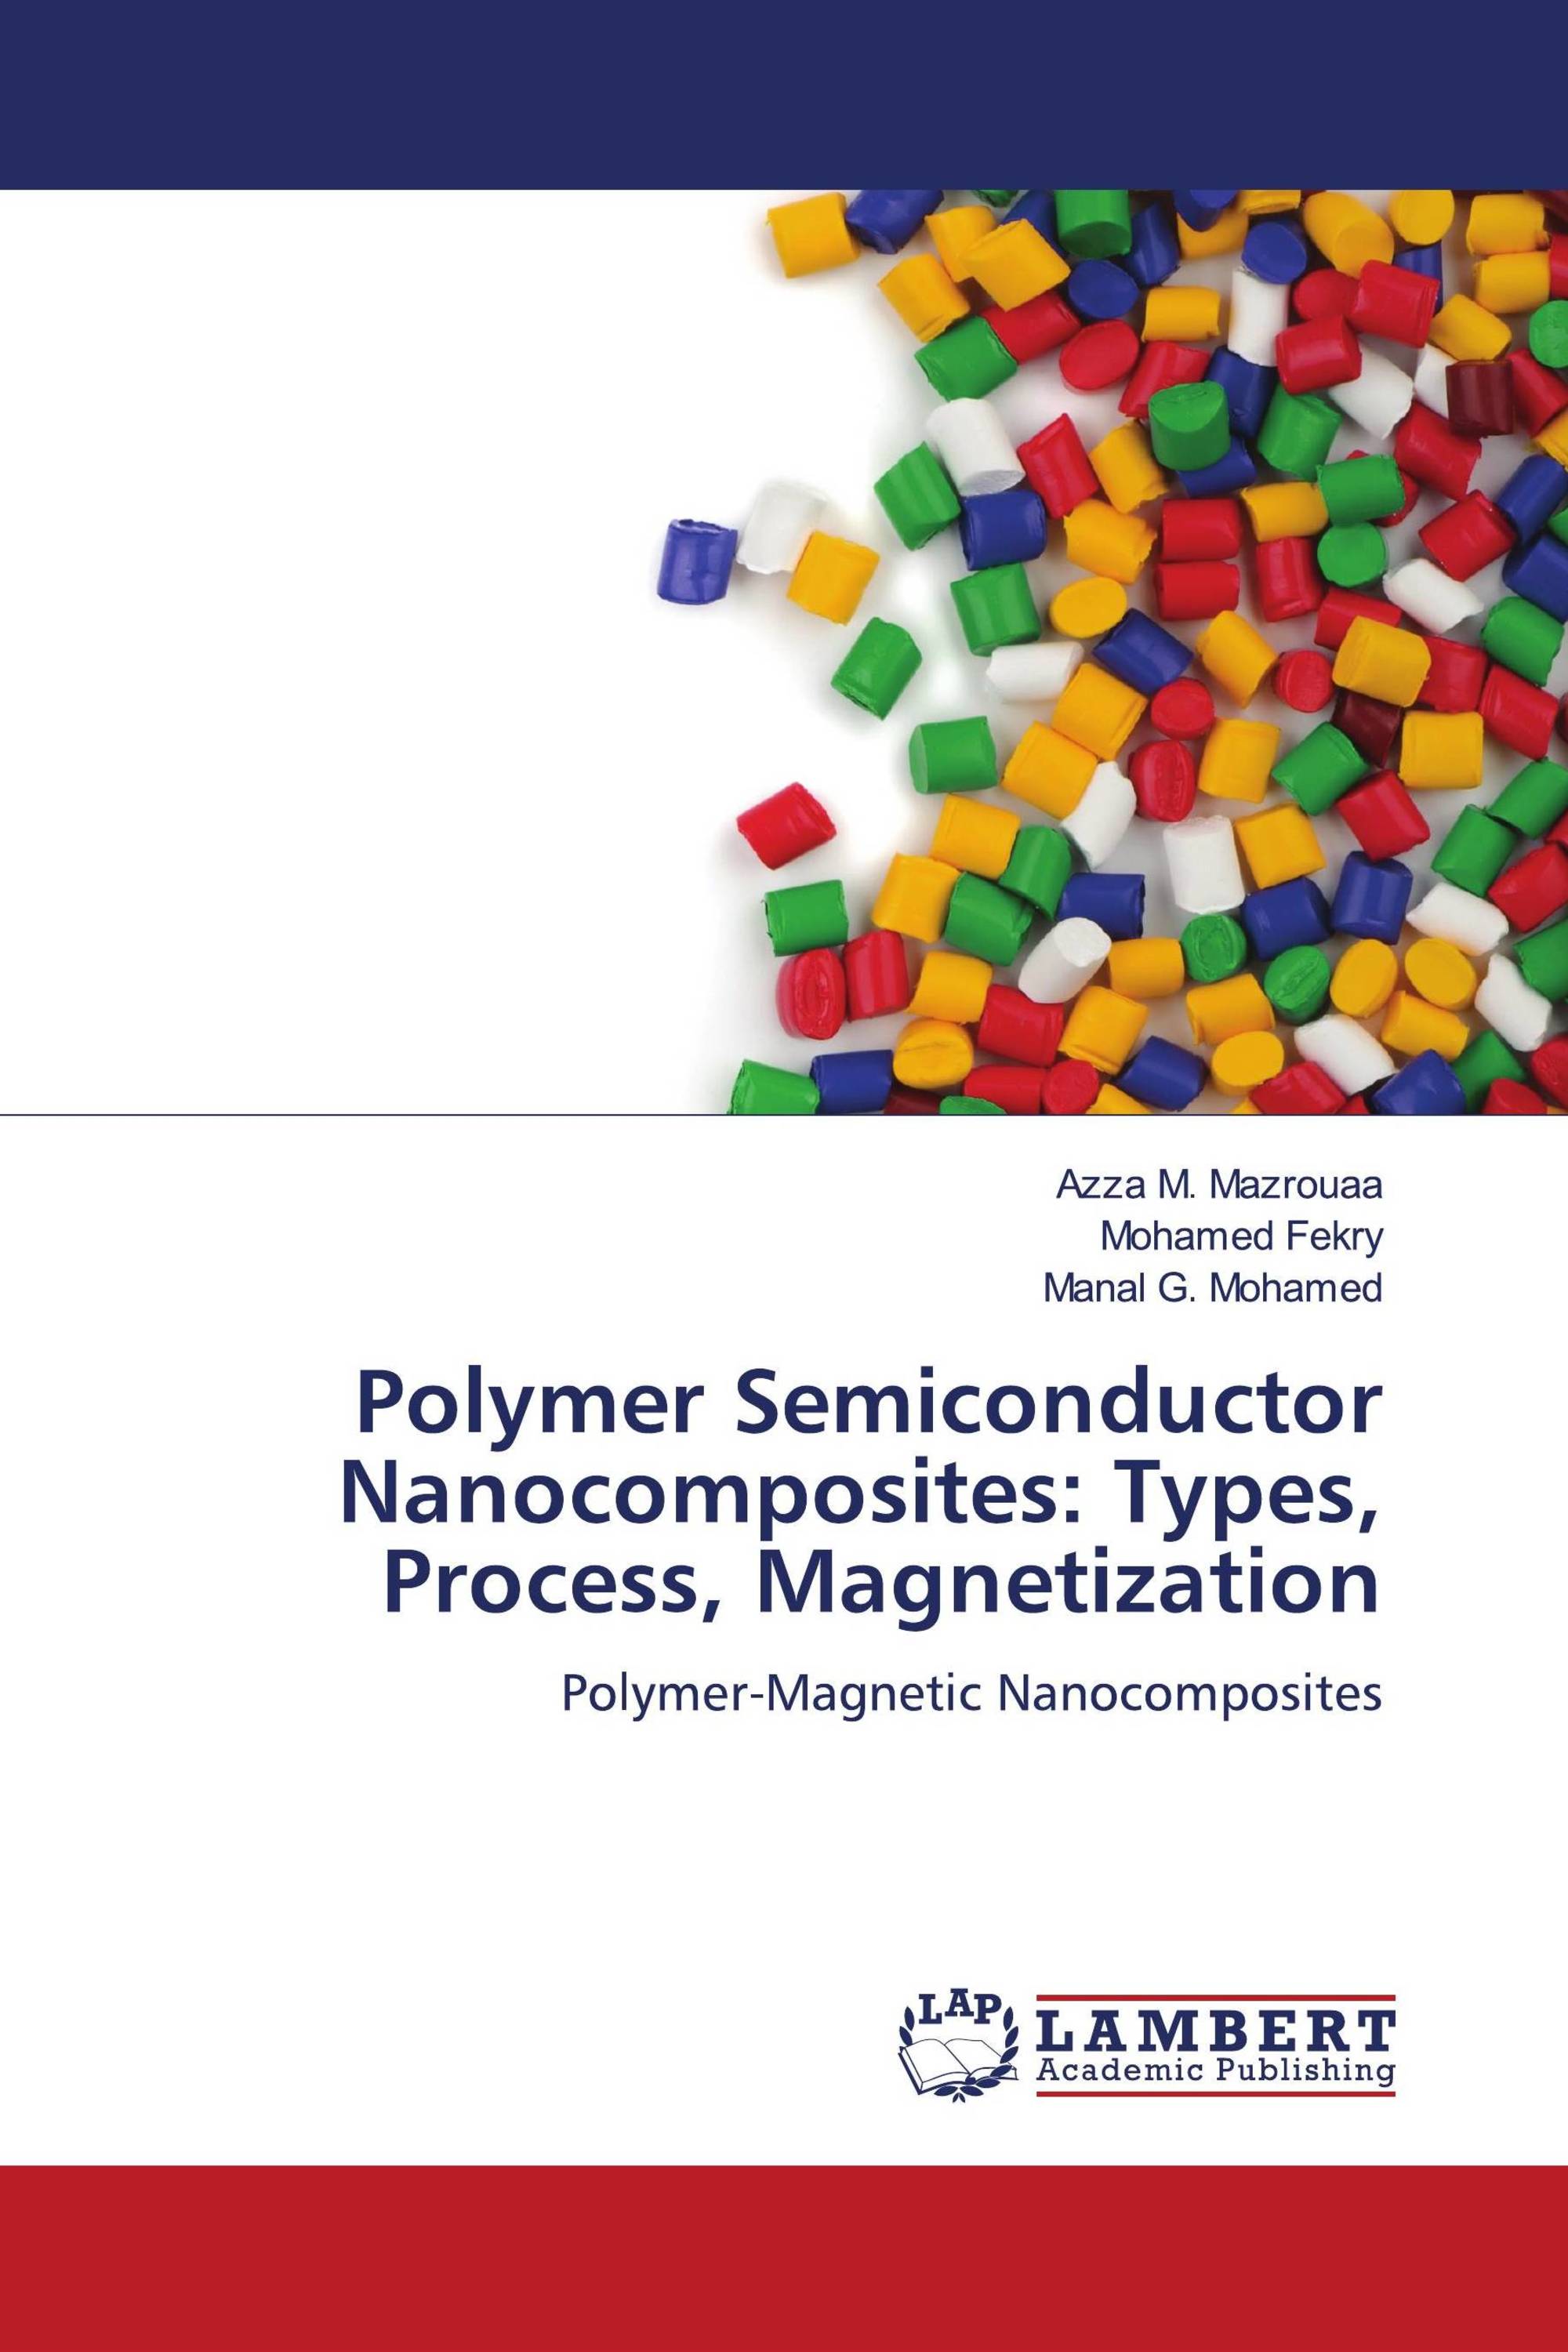 Polymer Semiconductor Nanocomposites: Types, Process, Magnetization